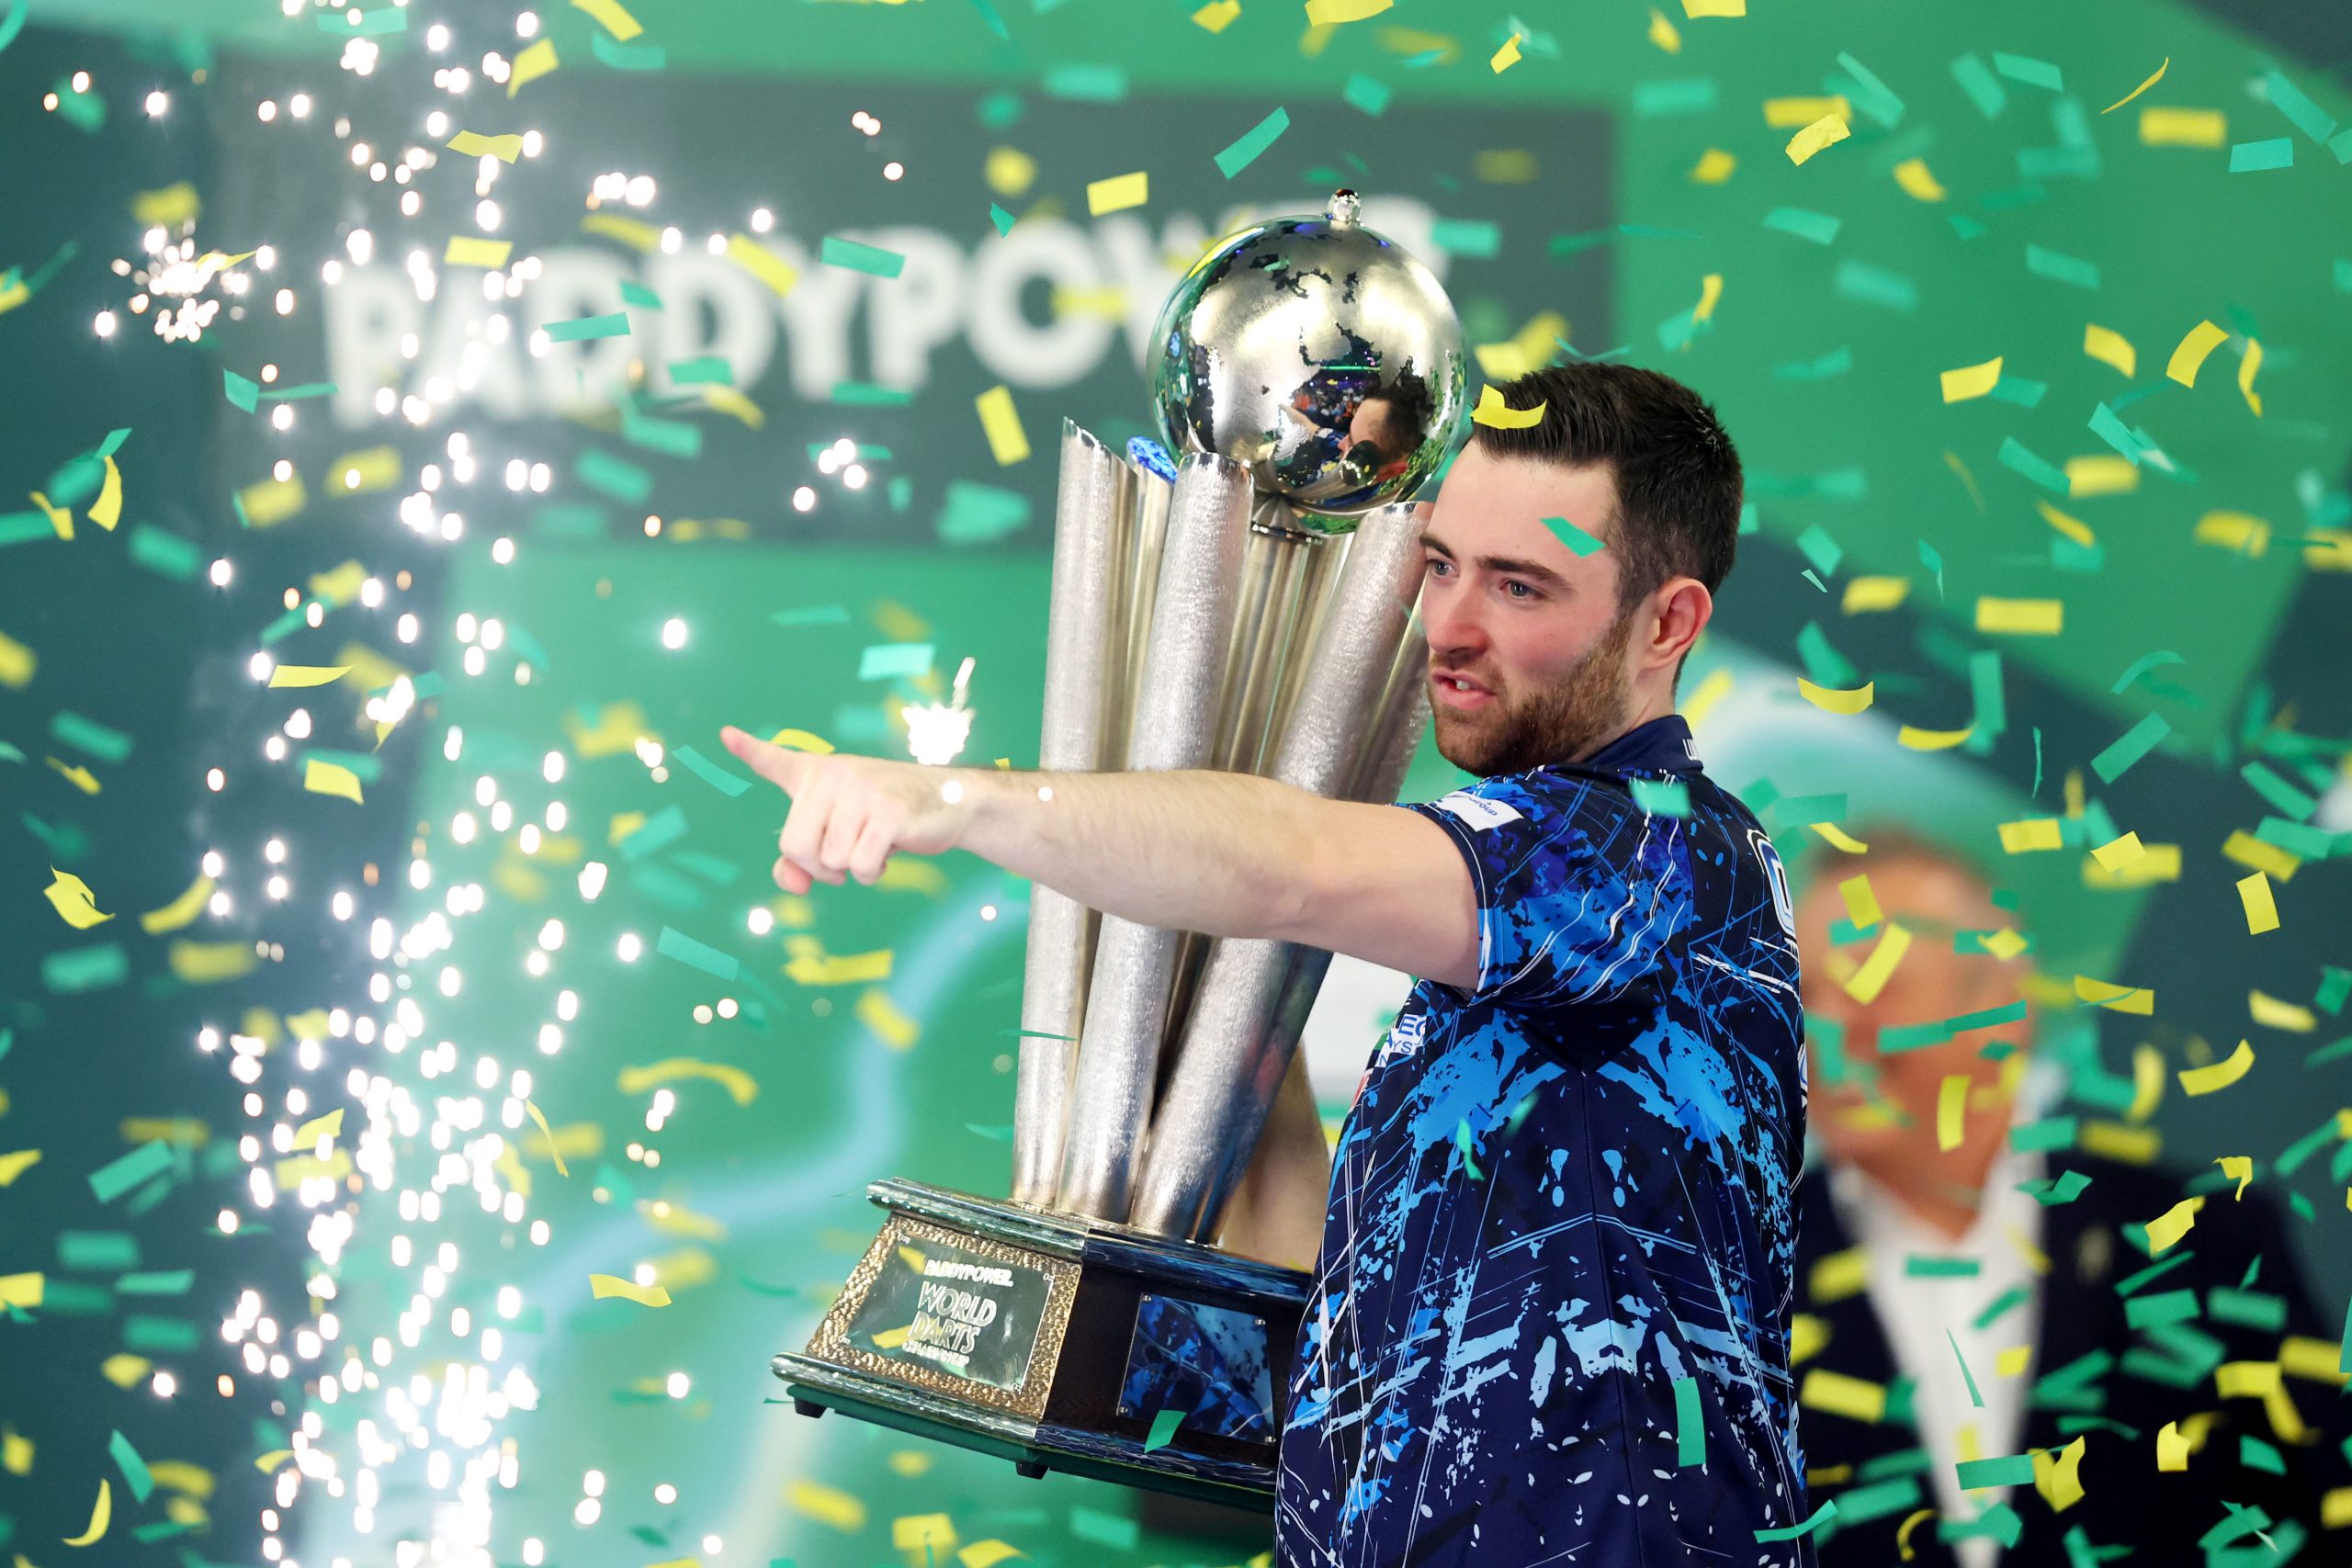 ‘180 machine’ Luke Humphries wins SECOND trophy leaving fans absolutely baffled as World Darts record is broken